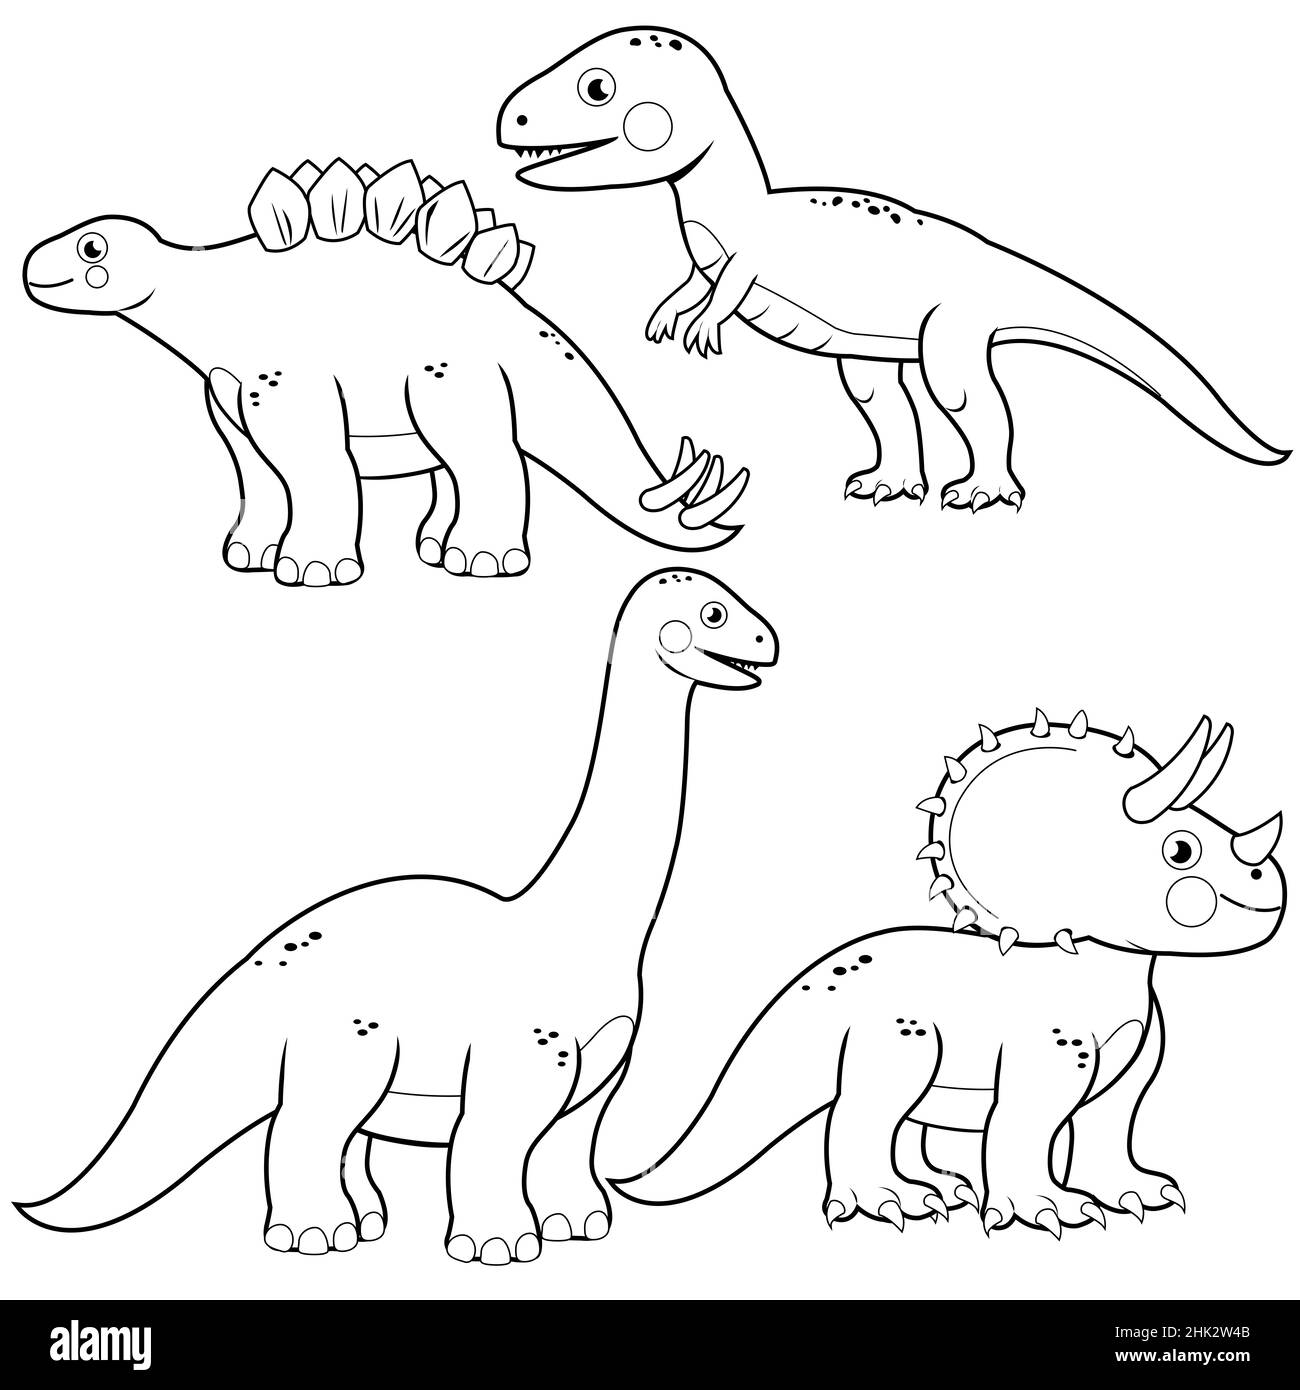 How to Draw a Dinosaur Head Tutorial and Dinosaur Coloring Page